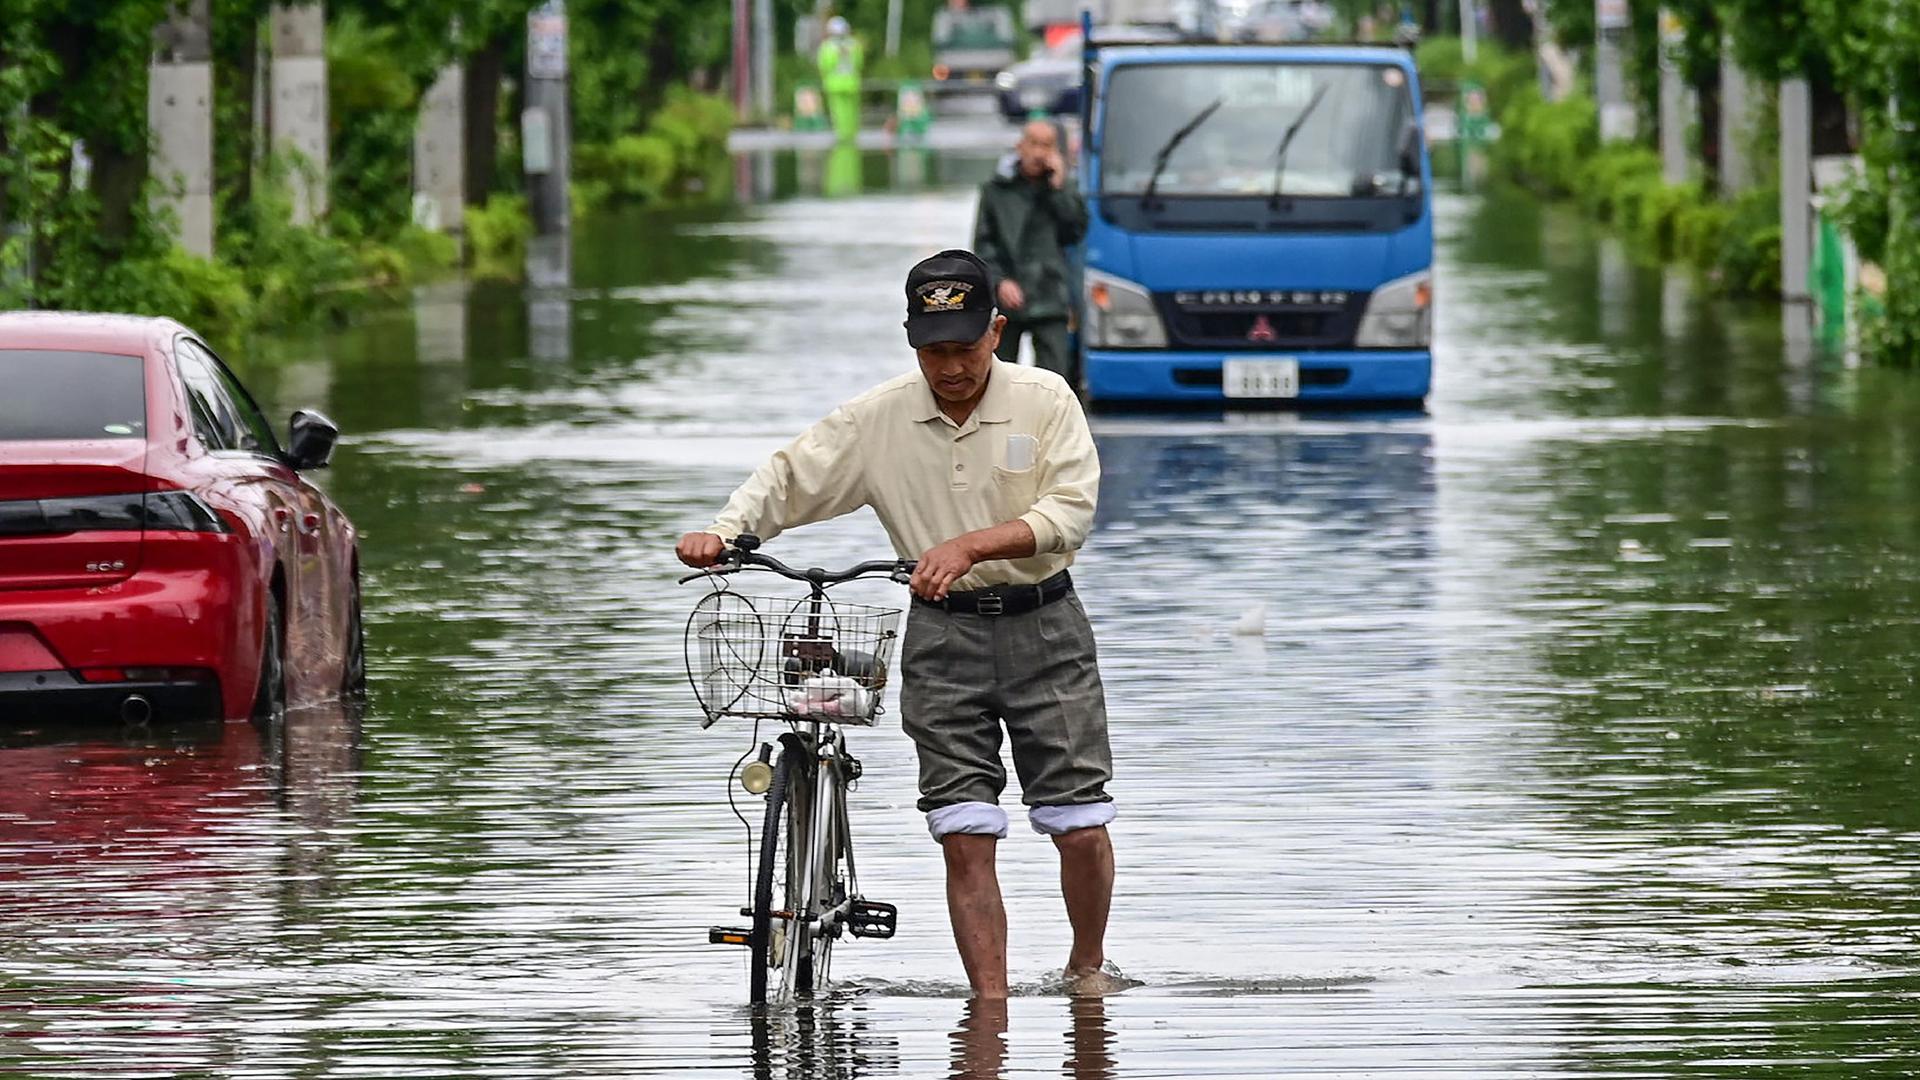 A man pushes a bicycle down a road closed due to flooding at Koshigaya, Saitama Prefecture on June 3, 2023, after heavy rains caused by passing Tropical Storm Mawar hit much of the country the day before. Heavy rain across parts of Japan has killed one person, left two missing and injured dozens more, authorities said on June 2, with thousands of residents issued evacuation warnings. (Photo by JIJI Press / AFP) / Japan OUT